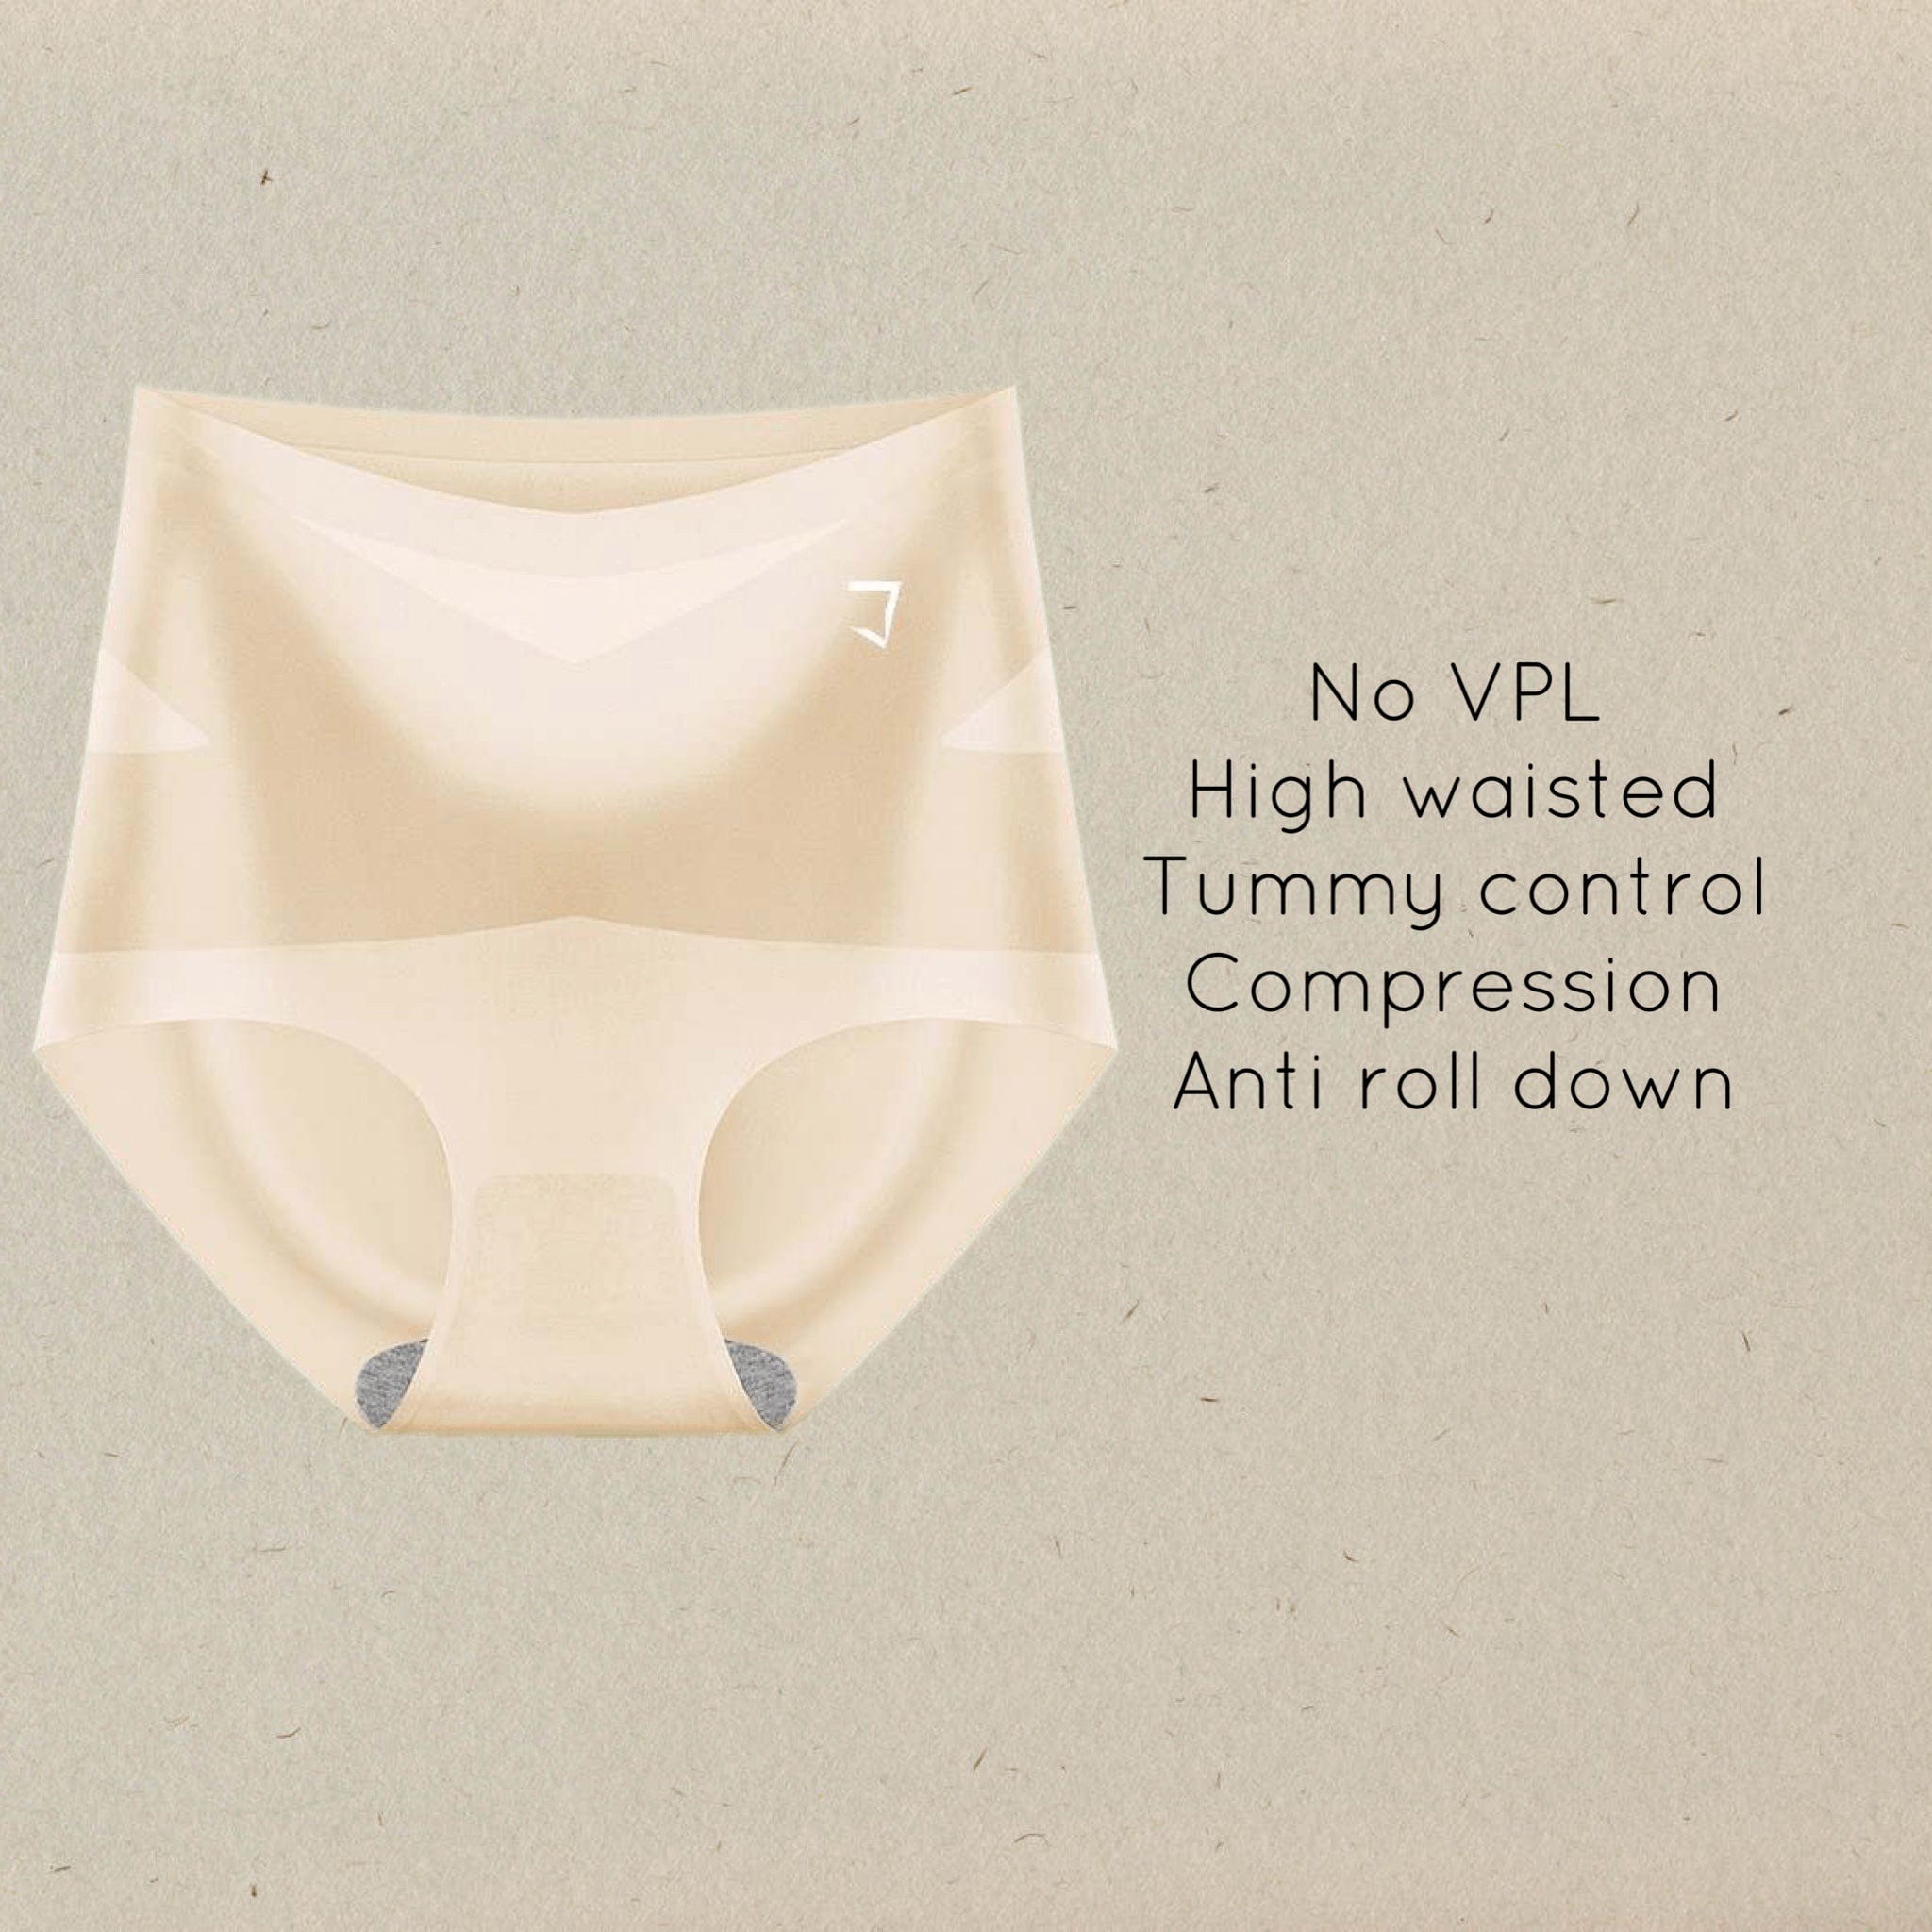 Everyday seamless high waisted tummy control anti roll down panties (no vpl) - set of 3 panties (please check for availability before adding to cart)